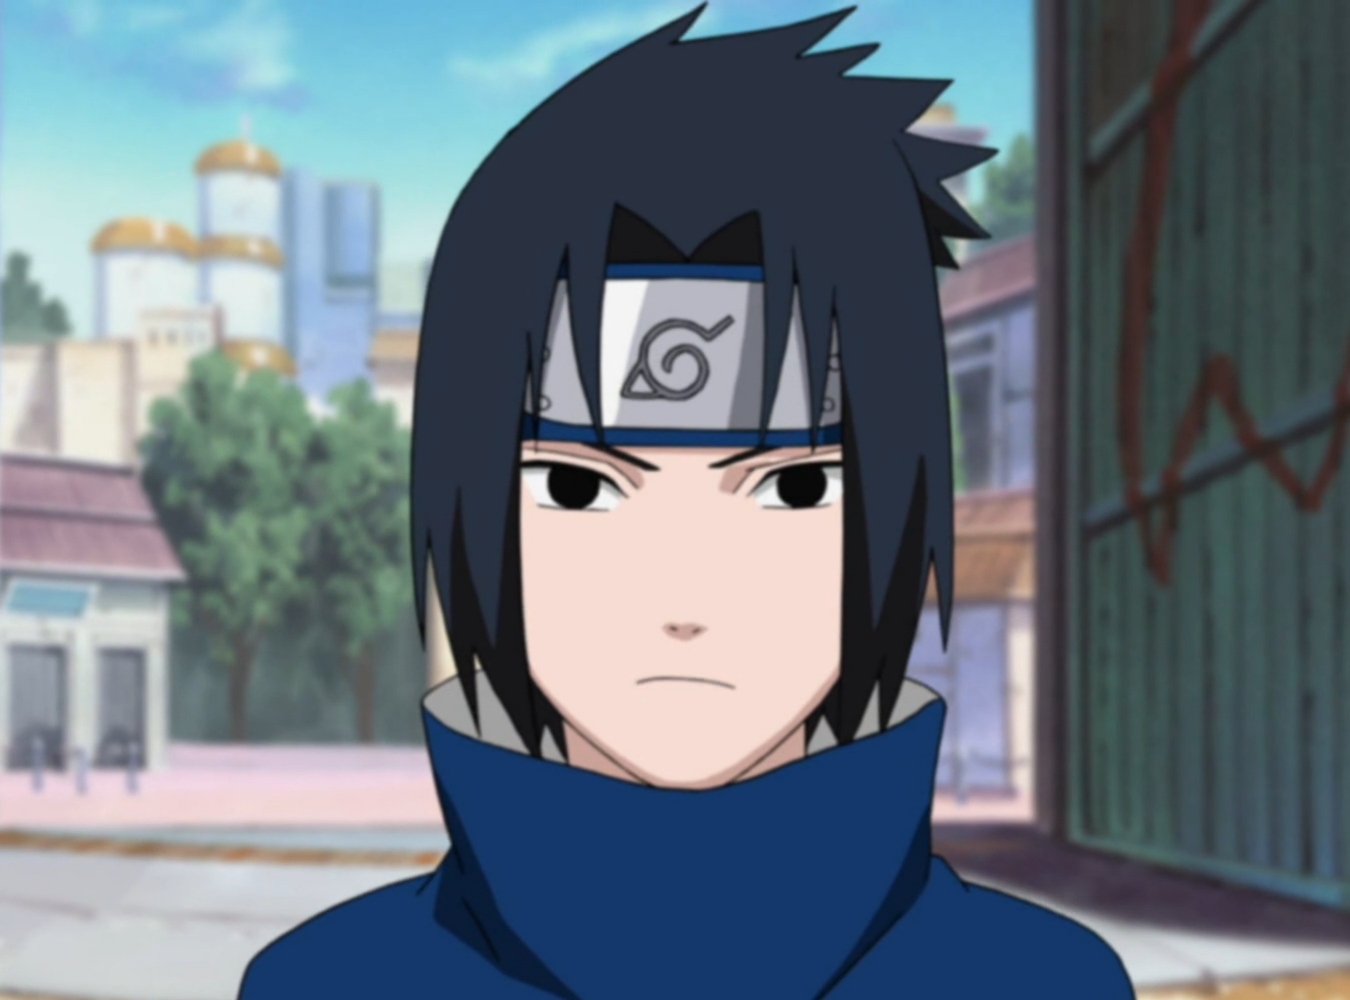 images of naruto characters